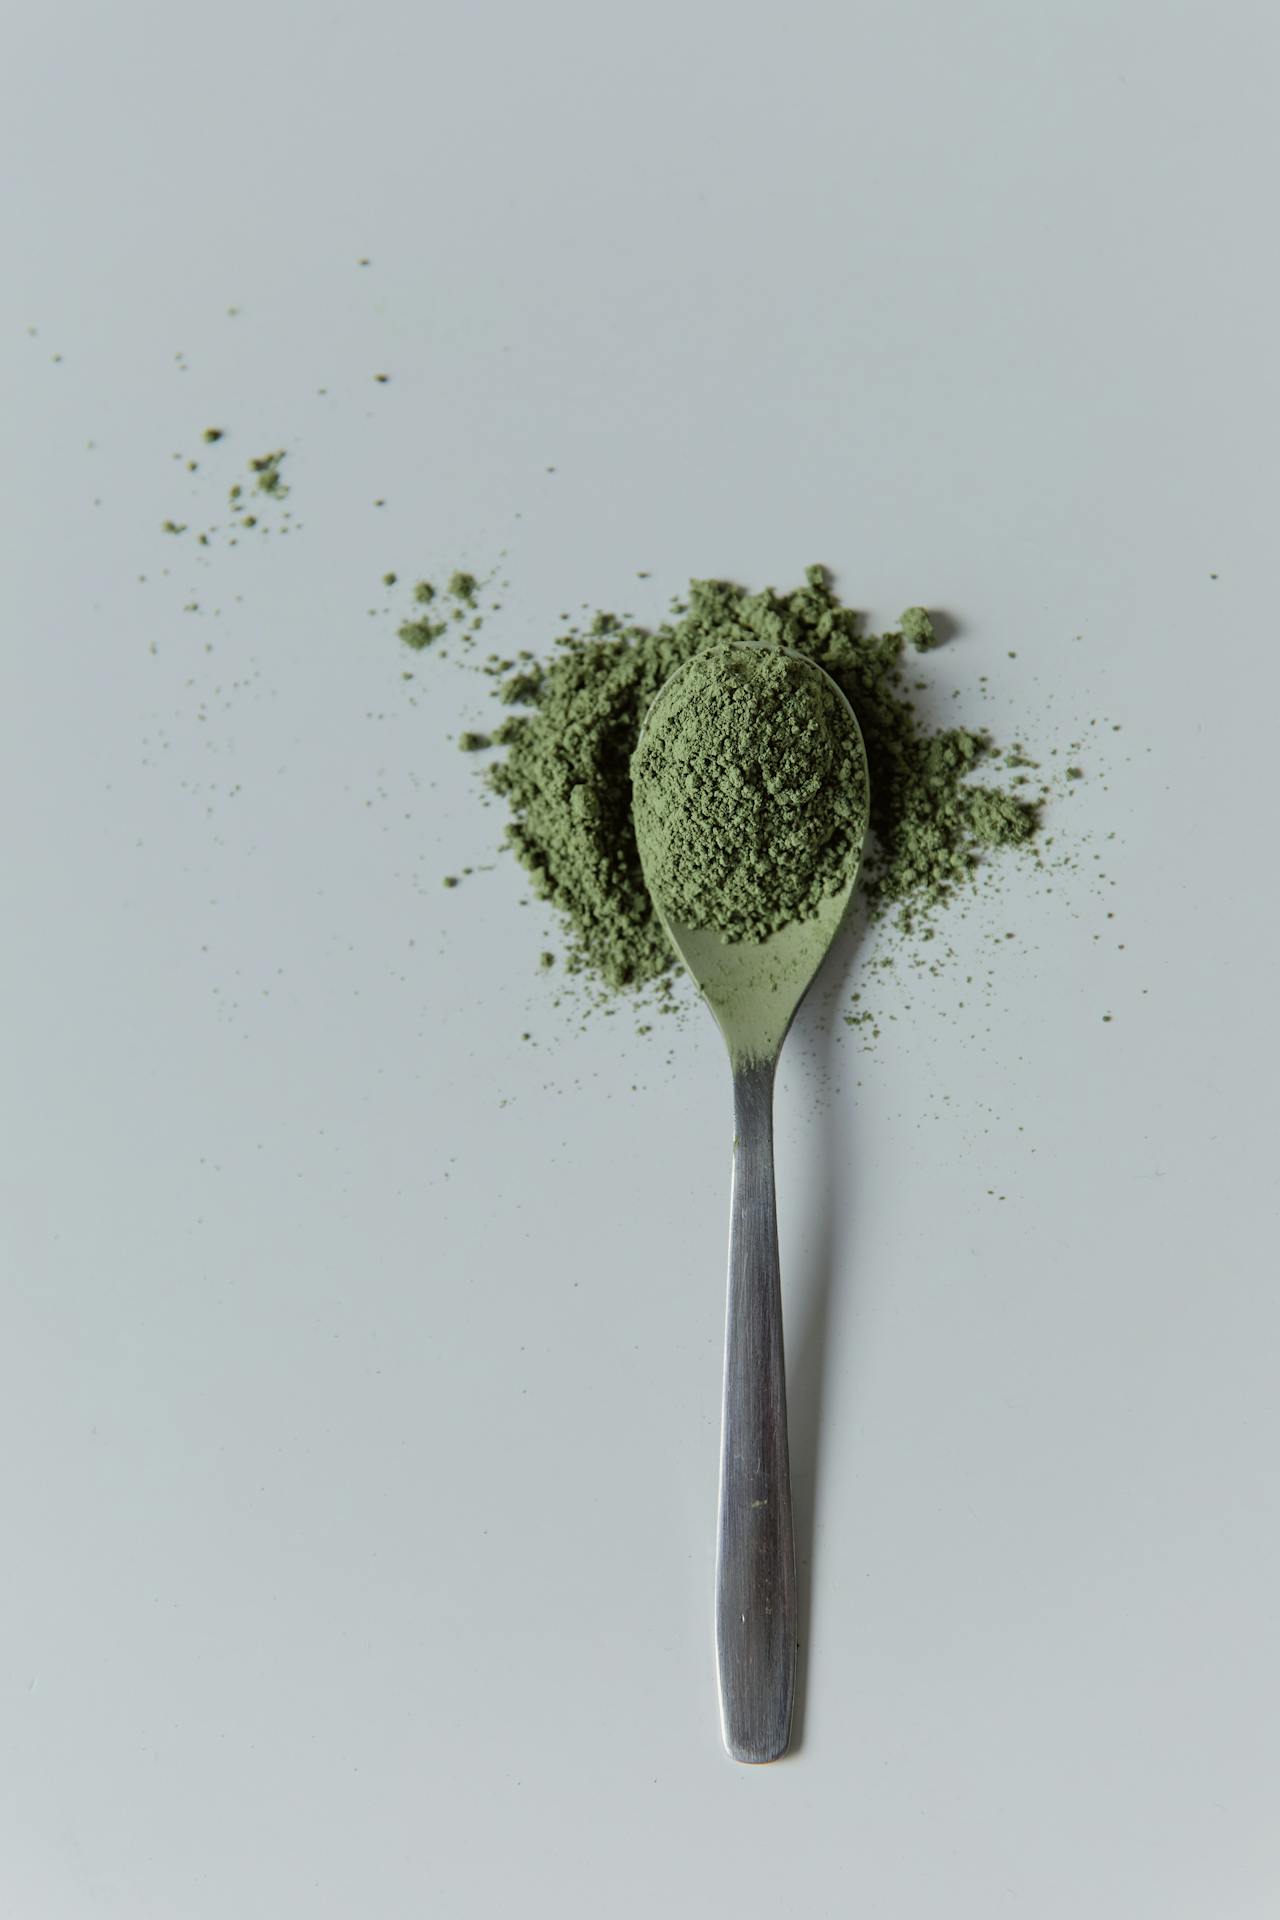 Talking about Kratom - Its Benefits and Risks